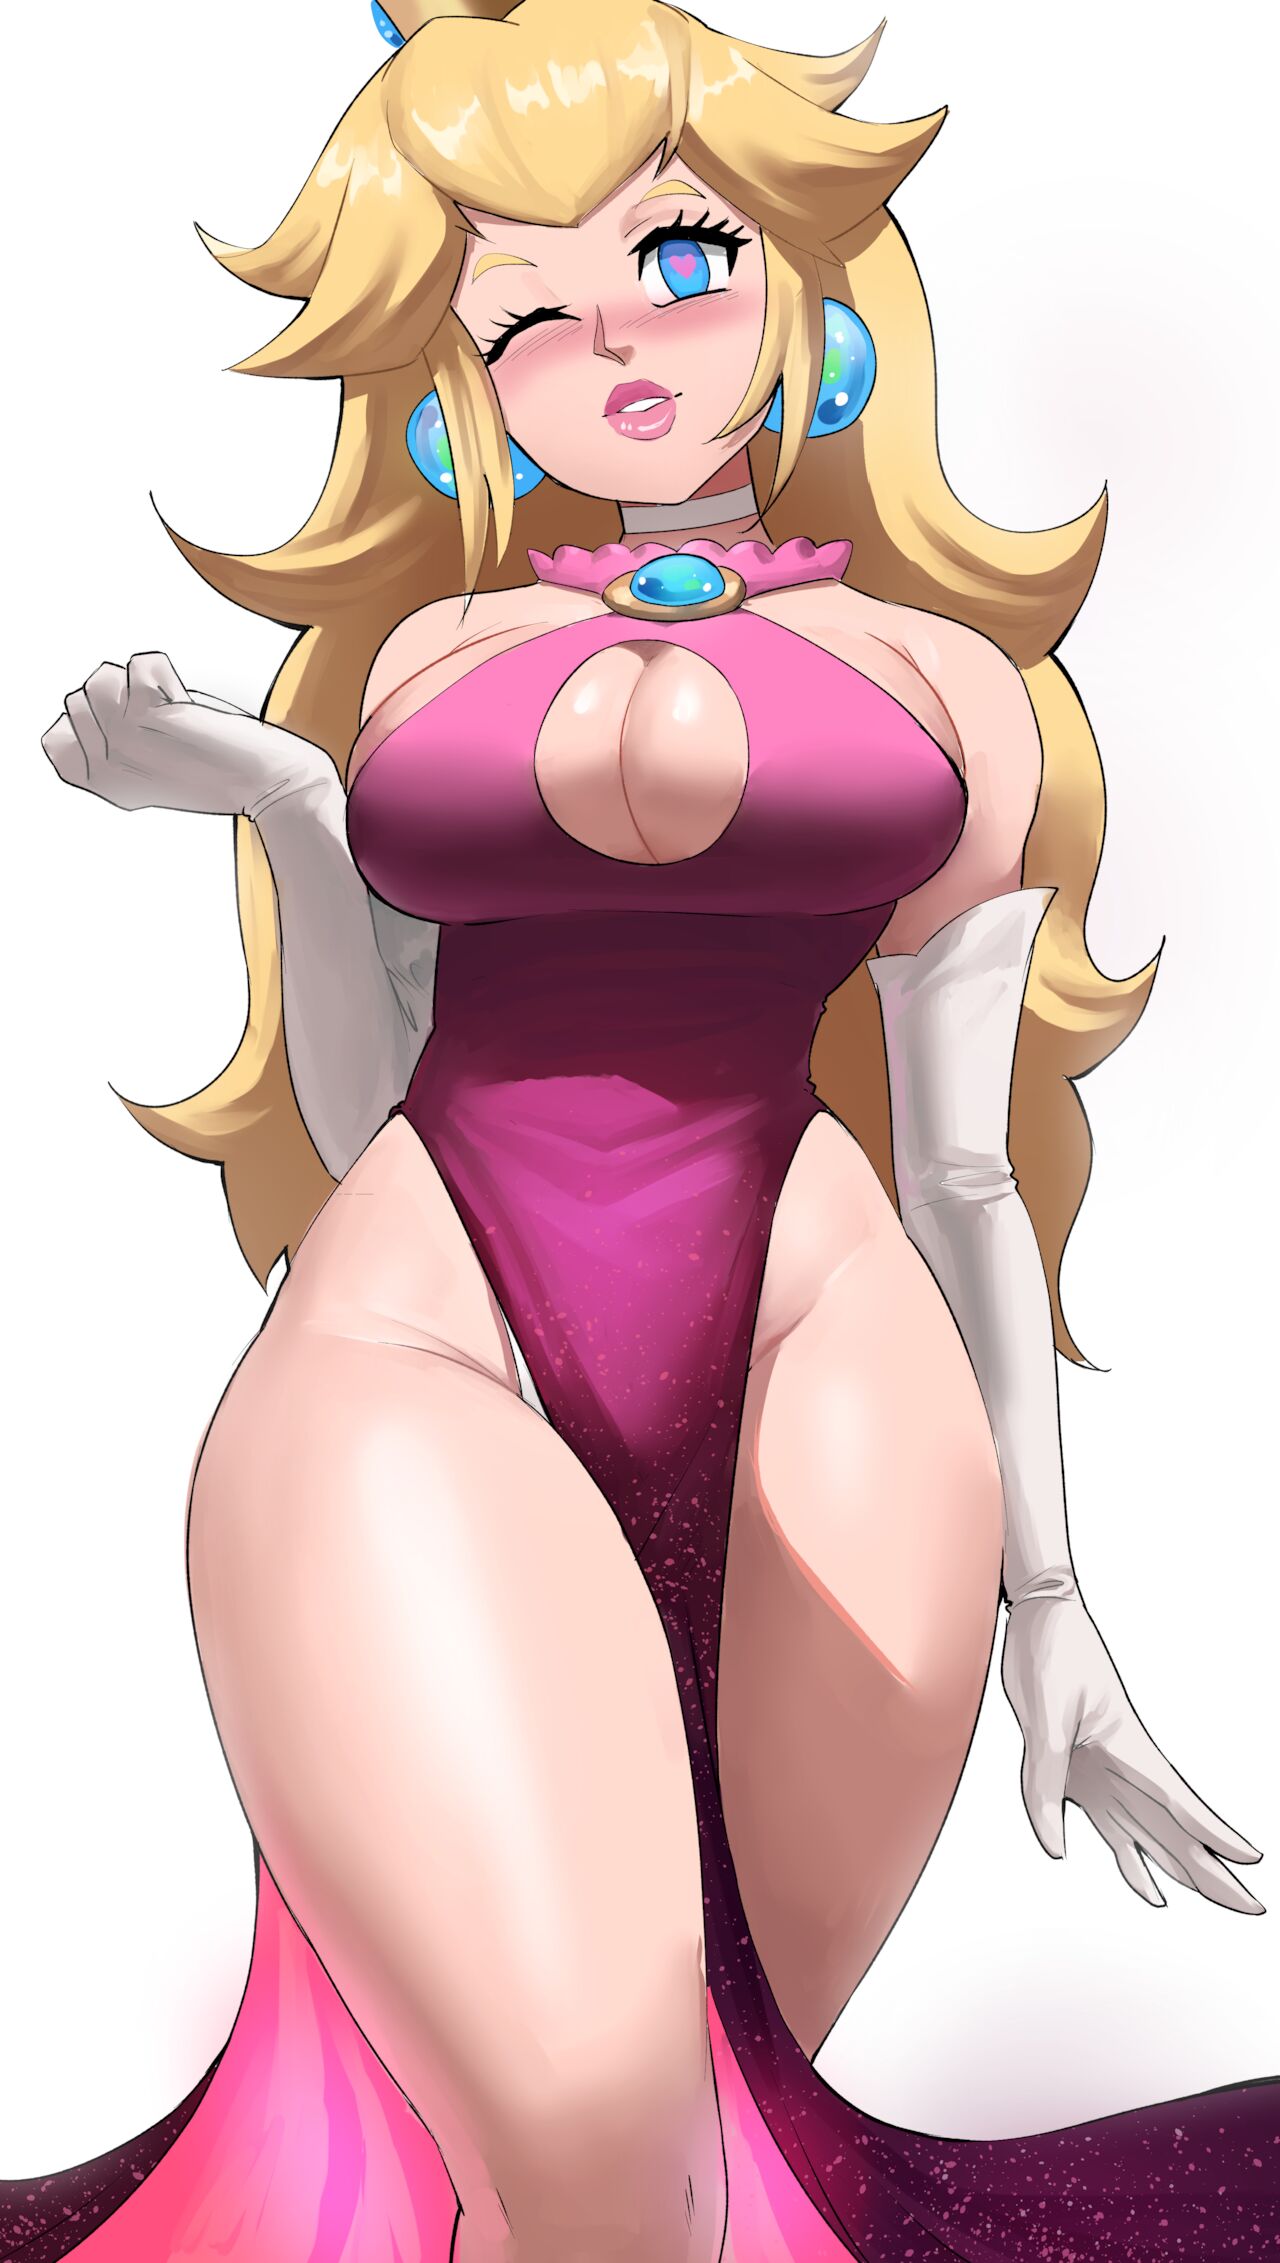 3D images of Daisy and Rosalina Echo Saber Peach